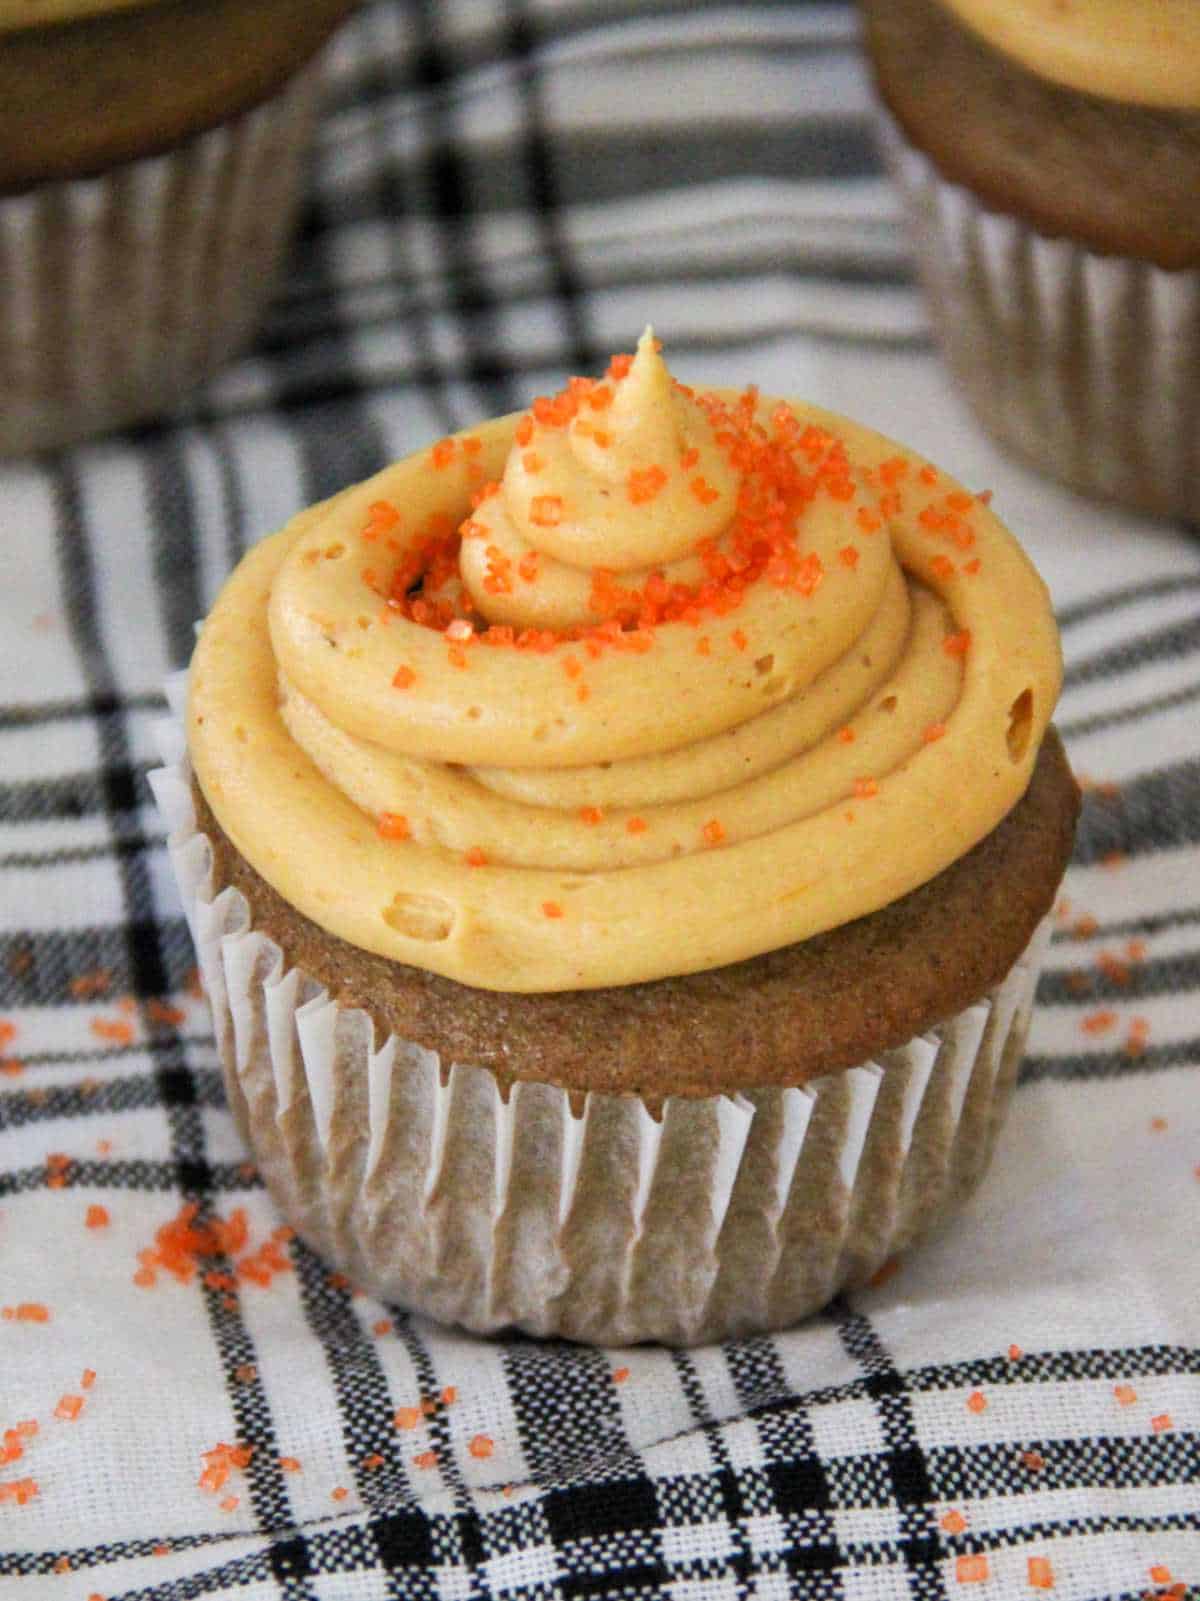 cupcakes with frosting decorated with orange sugar.